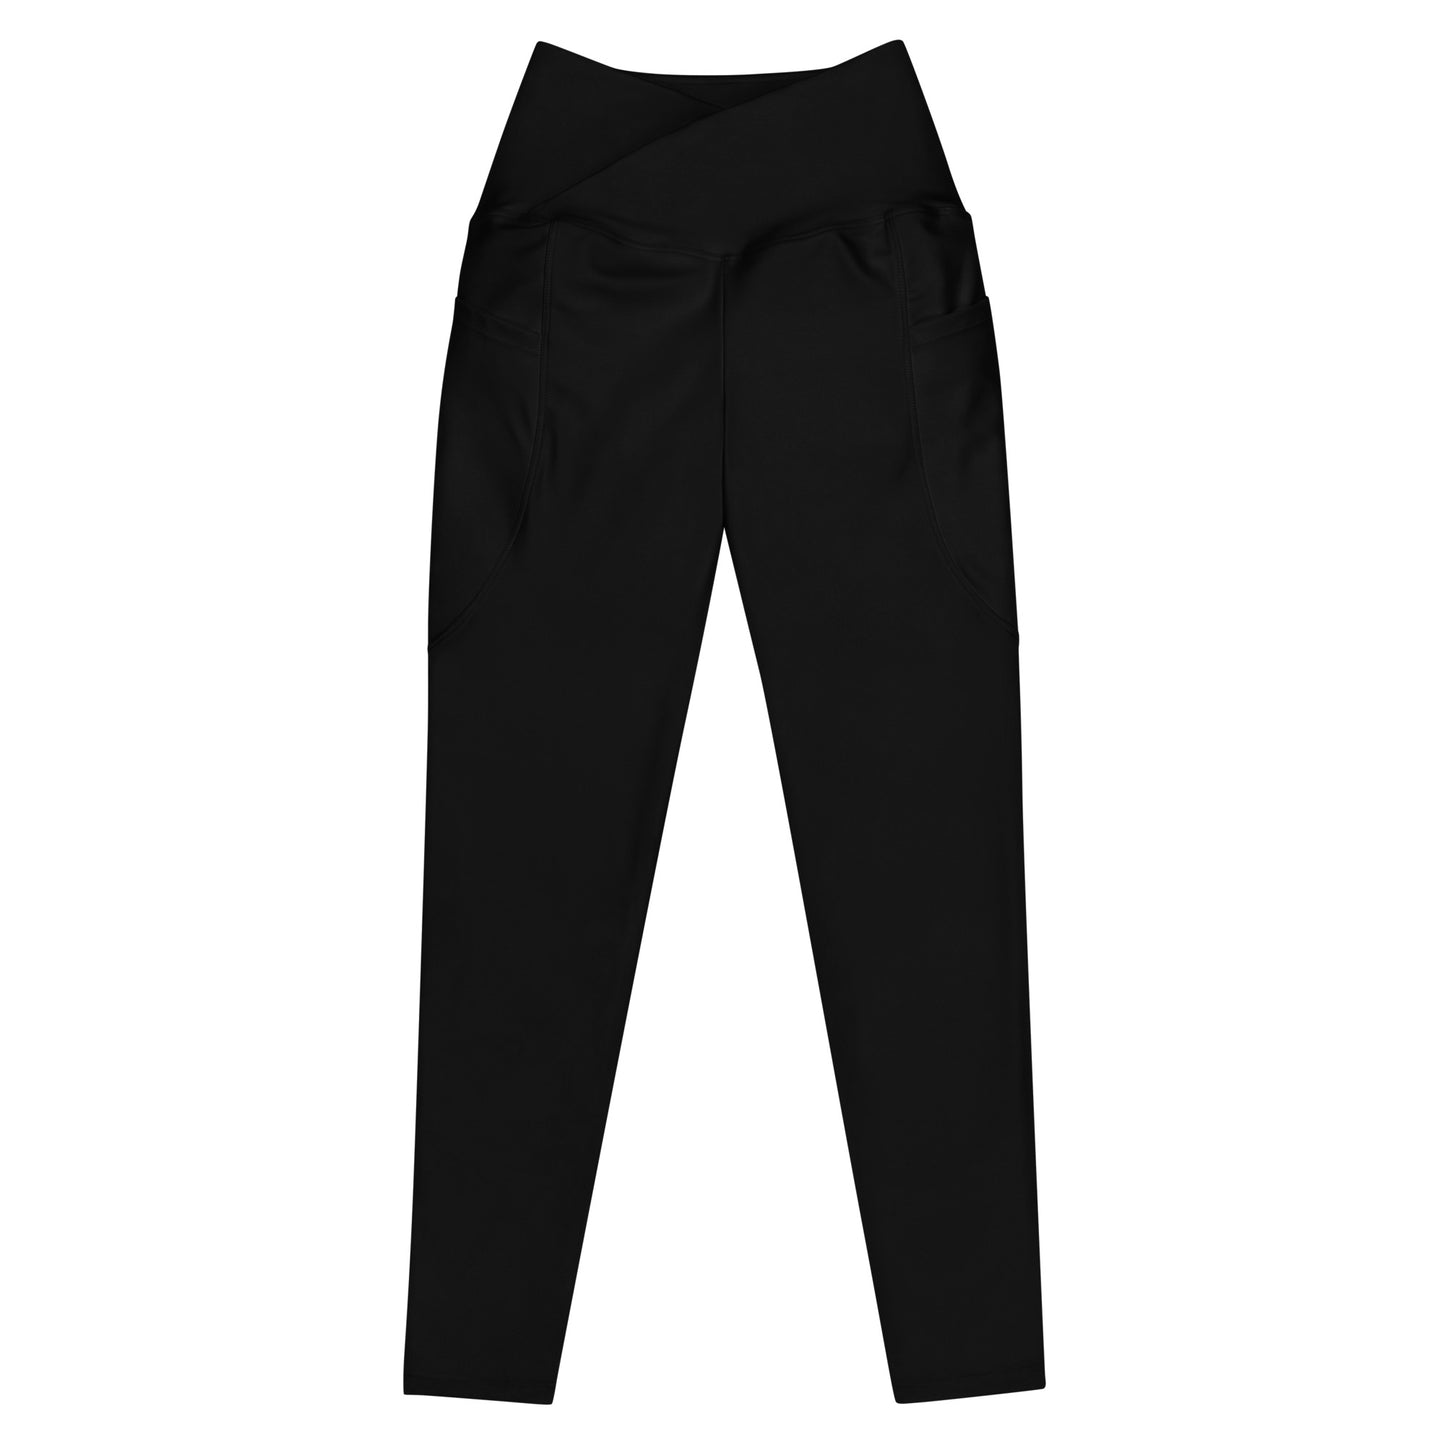 Black Crossover Leggings with Pockets